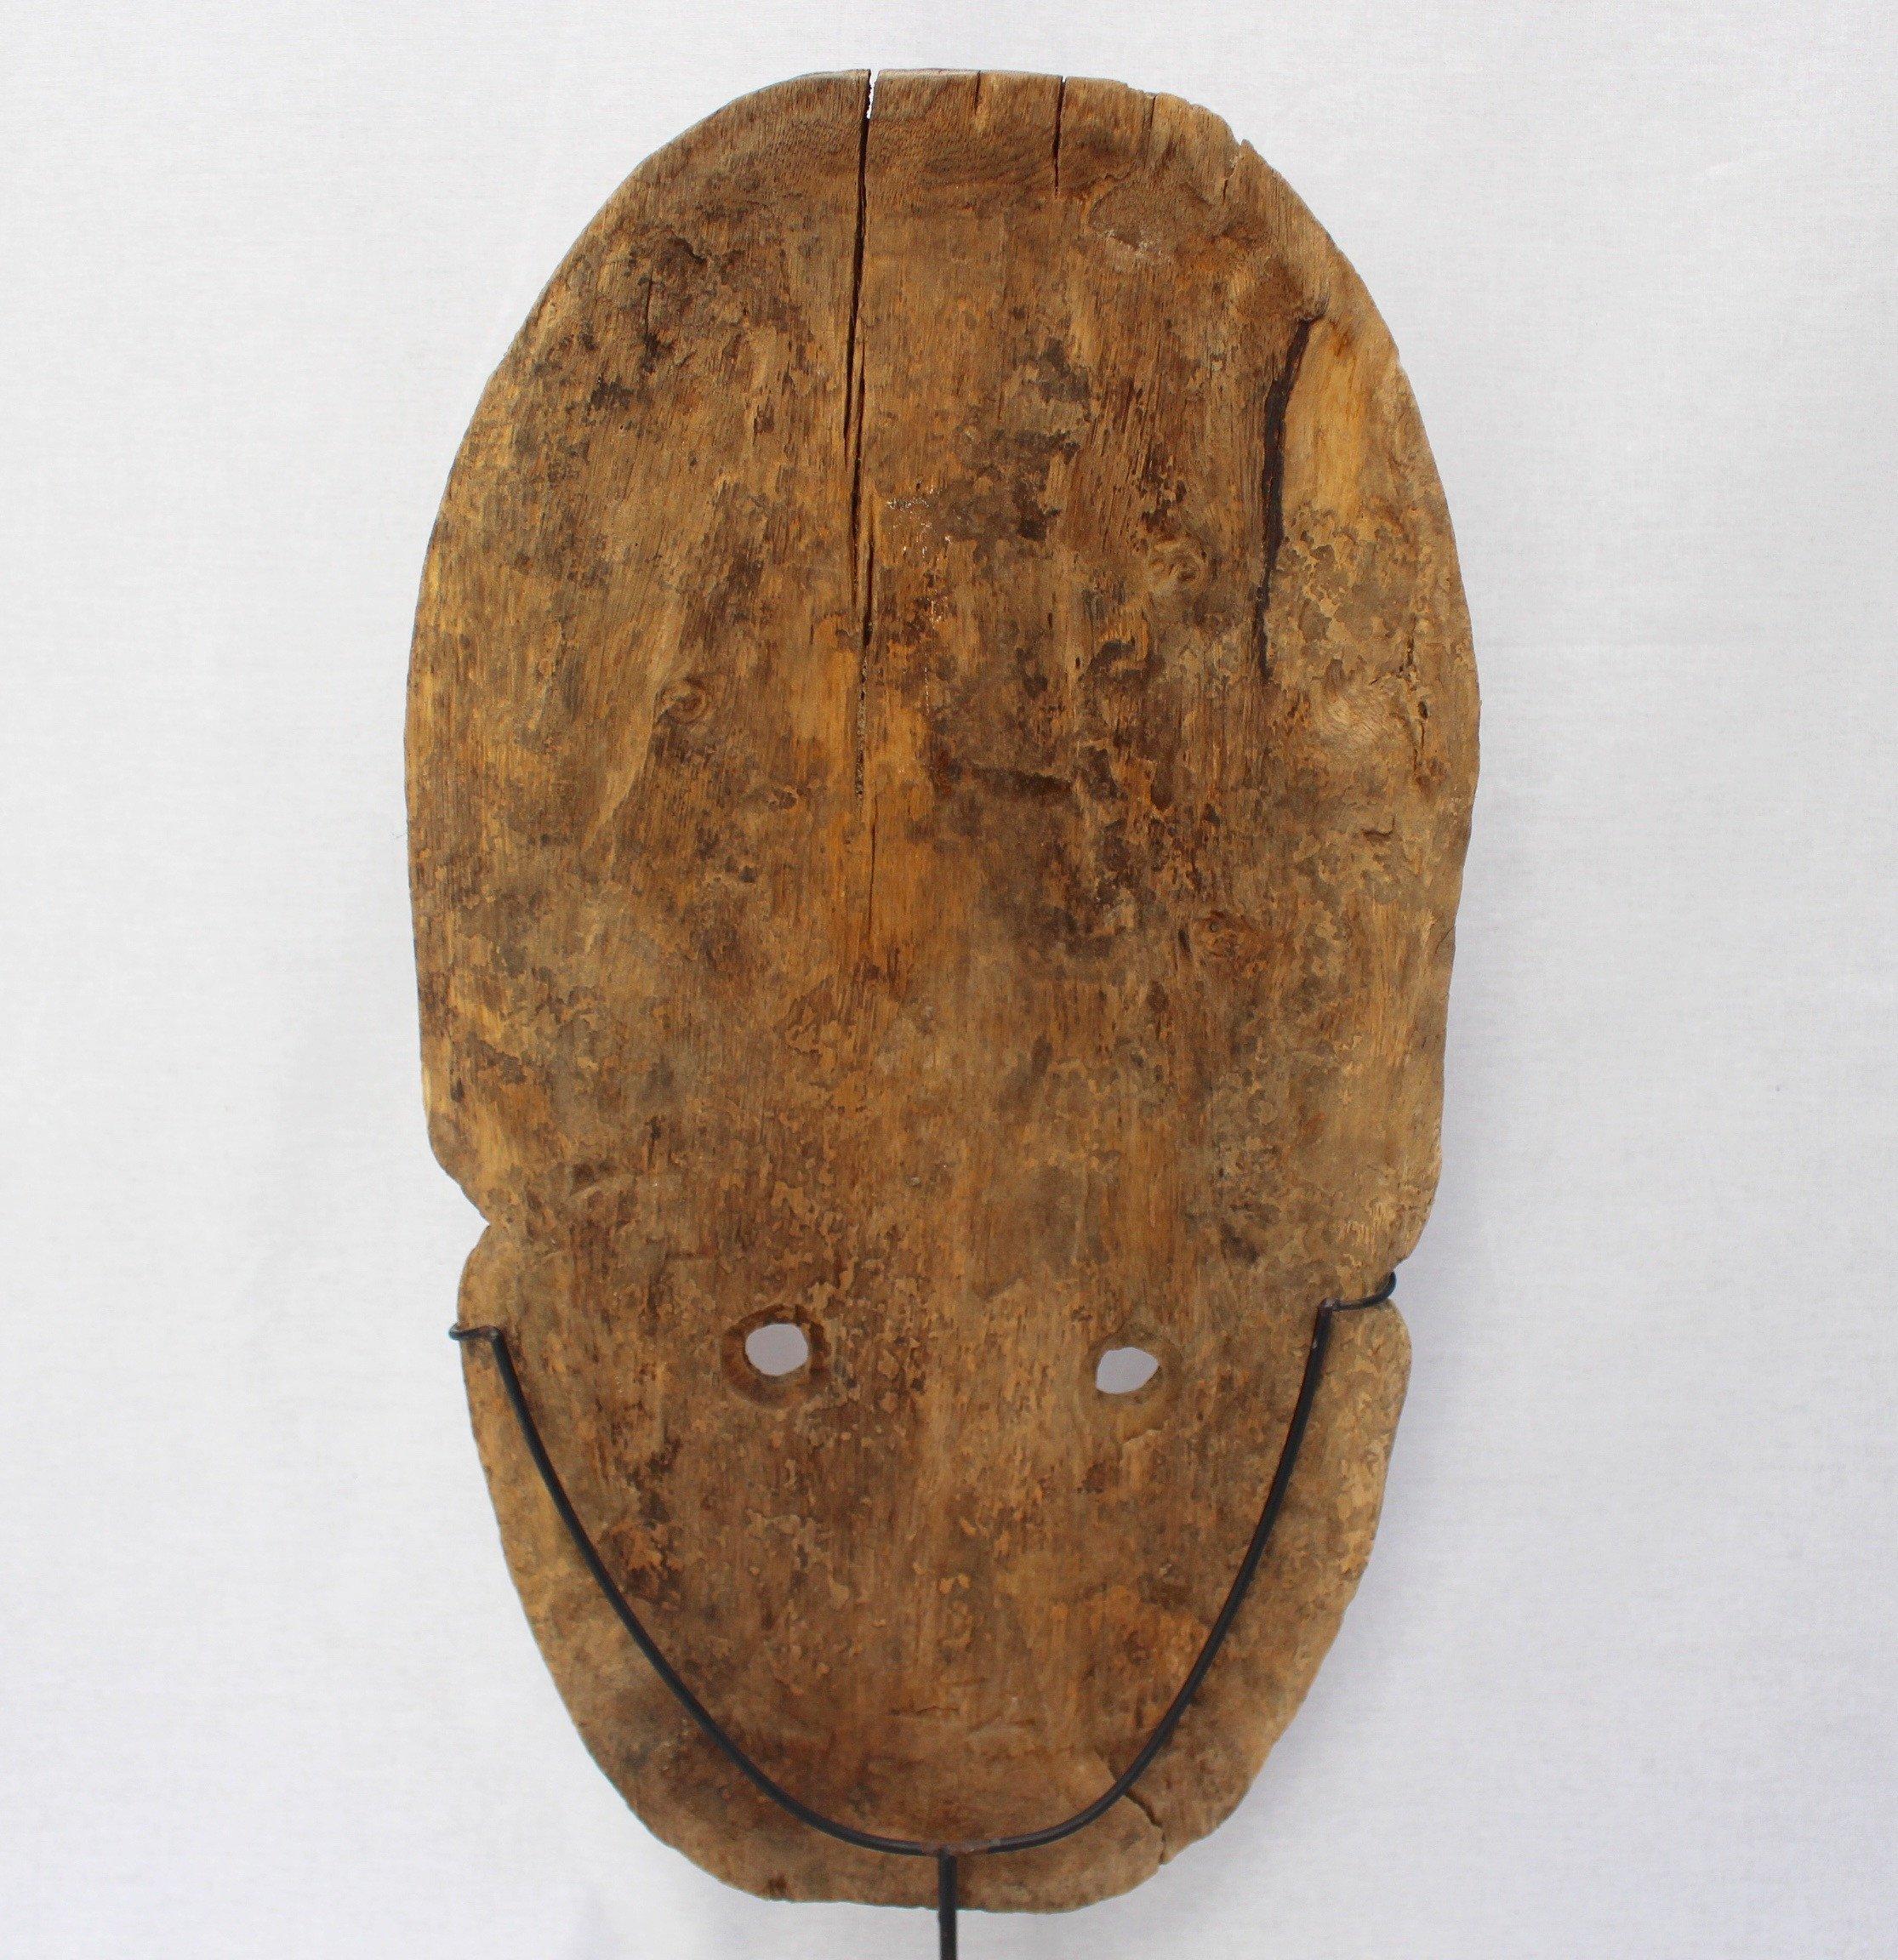 Timor Island sculpted wooden traditional mask (early 20th century) on contemporary metal stand. This is a large mask of a male figure with pronounced facial features and two circular holes as eyes and decorative headdress. The island of Timor gave